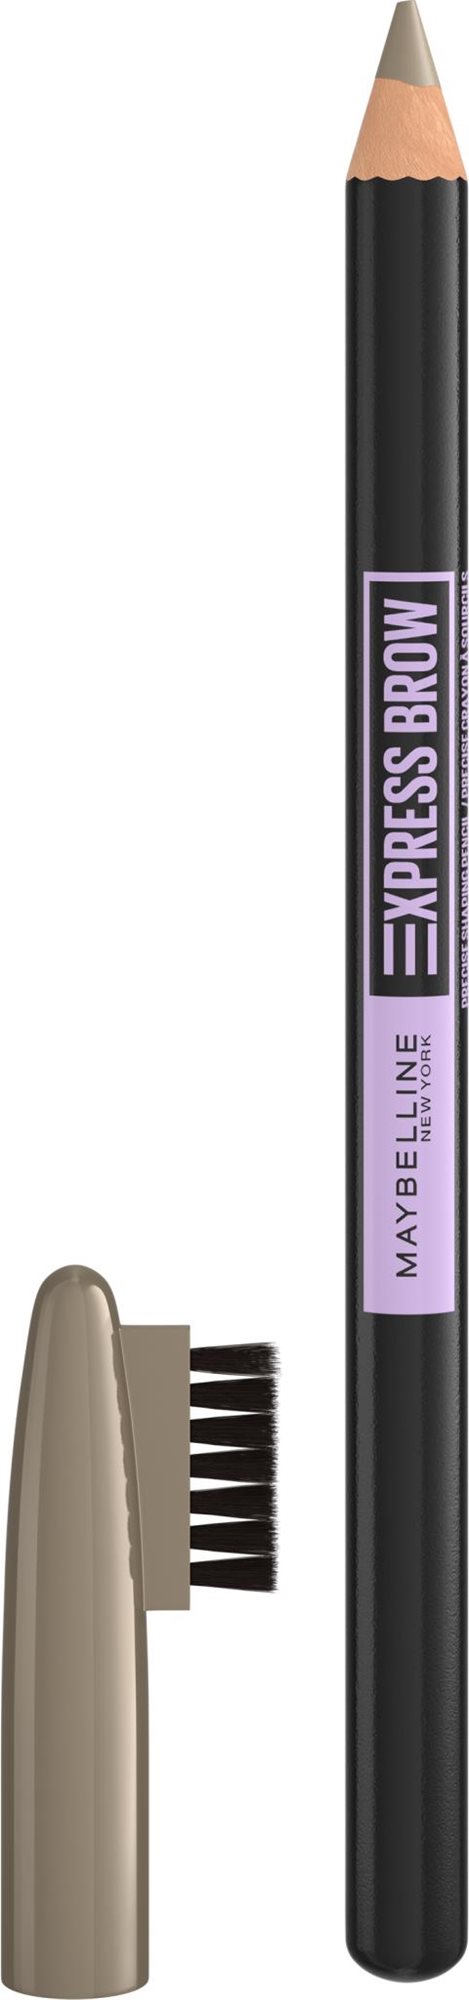 MAYBELLINE NEW YORK Express Brow Shaping Pencil 02 Blonde